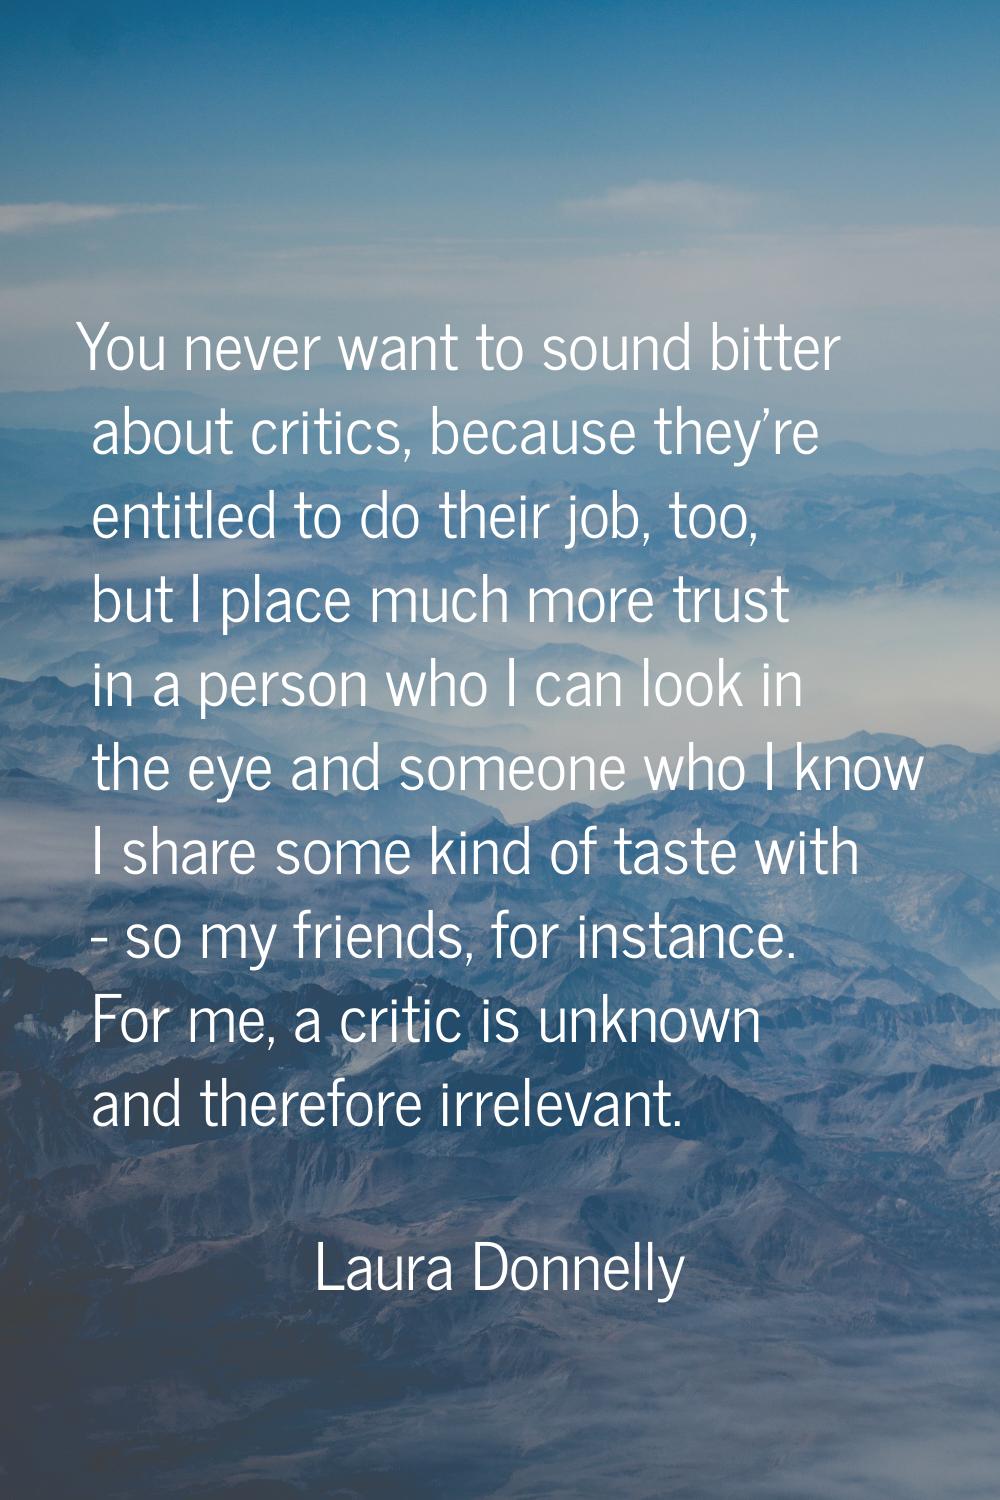 You never want to sound bitter about critics, because they're entitled to do their job, too, but I 